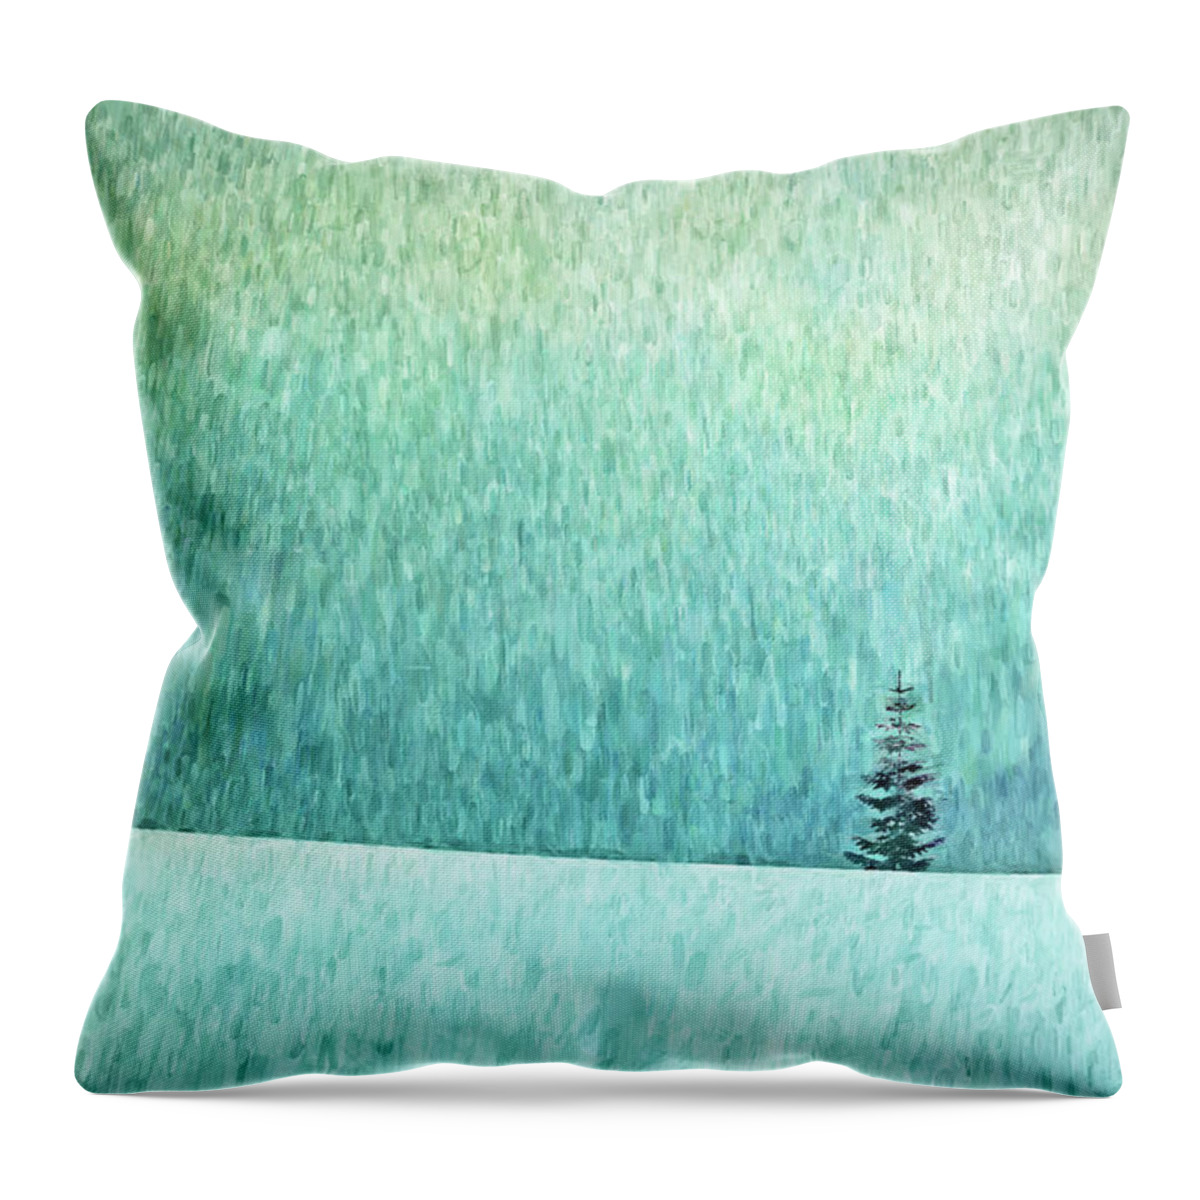 Winter Throw Pillow featuring the photograph Winter Tree by Nikolyn McDonald